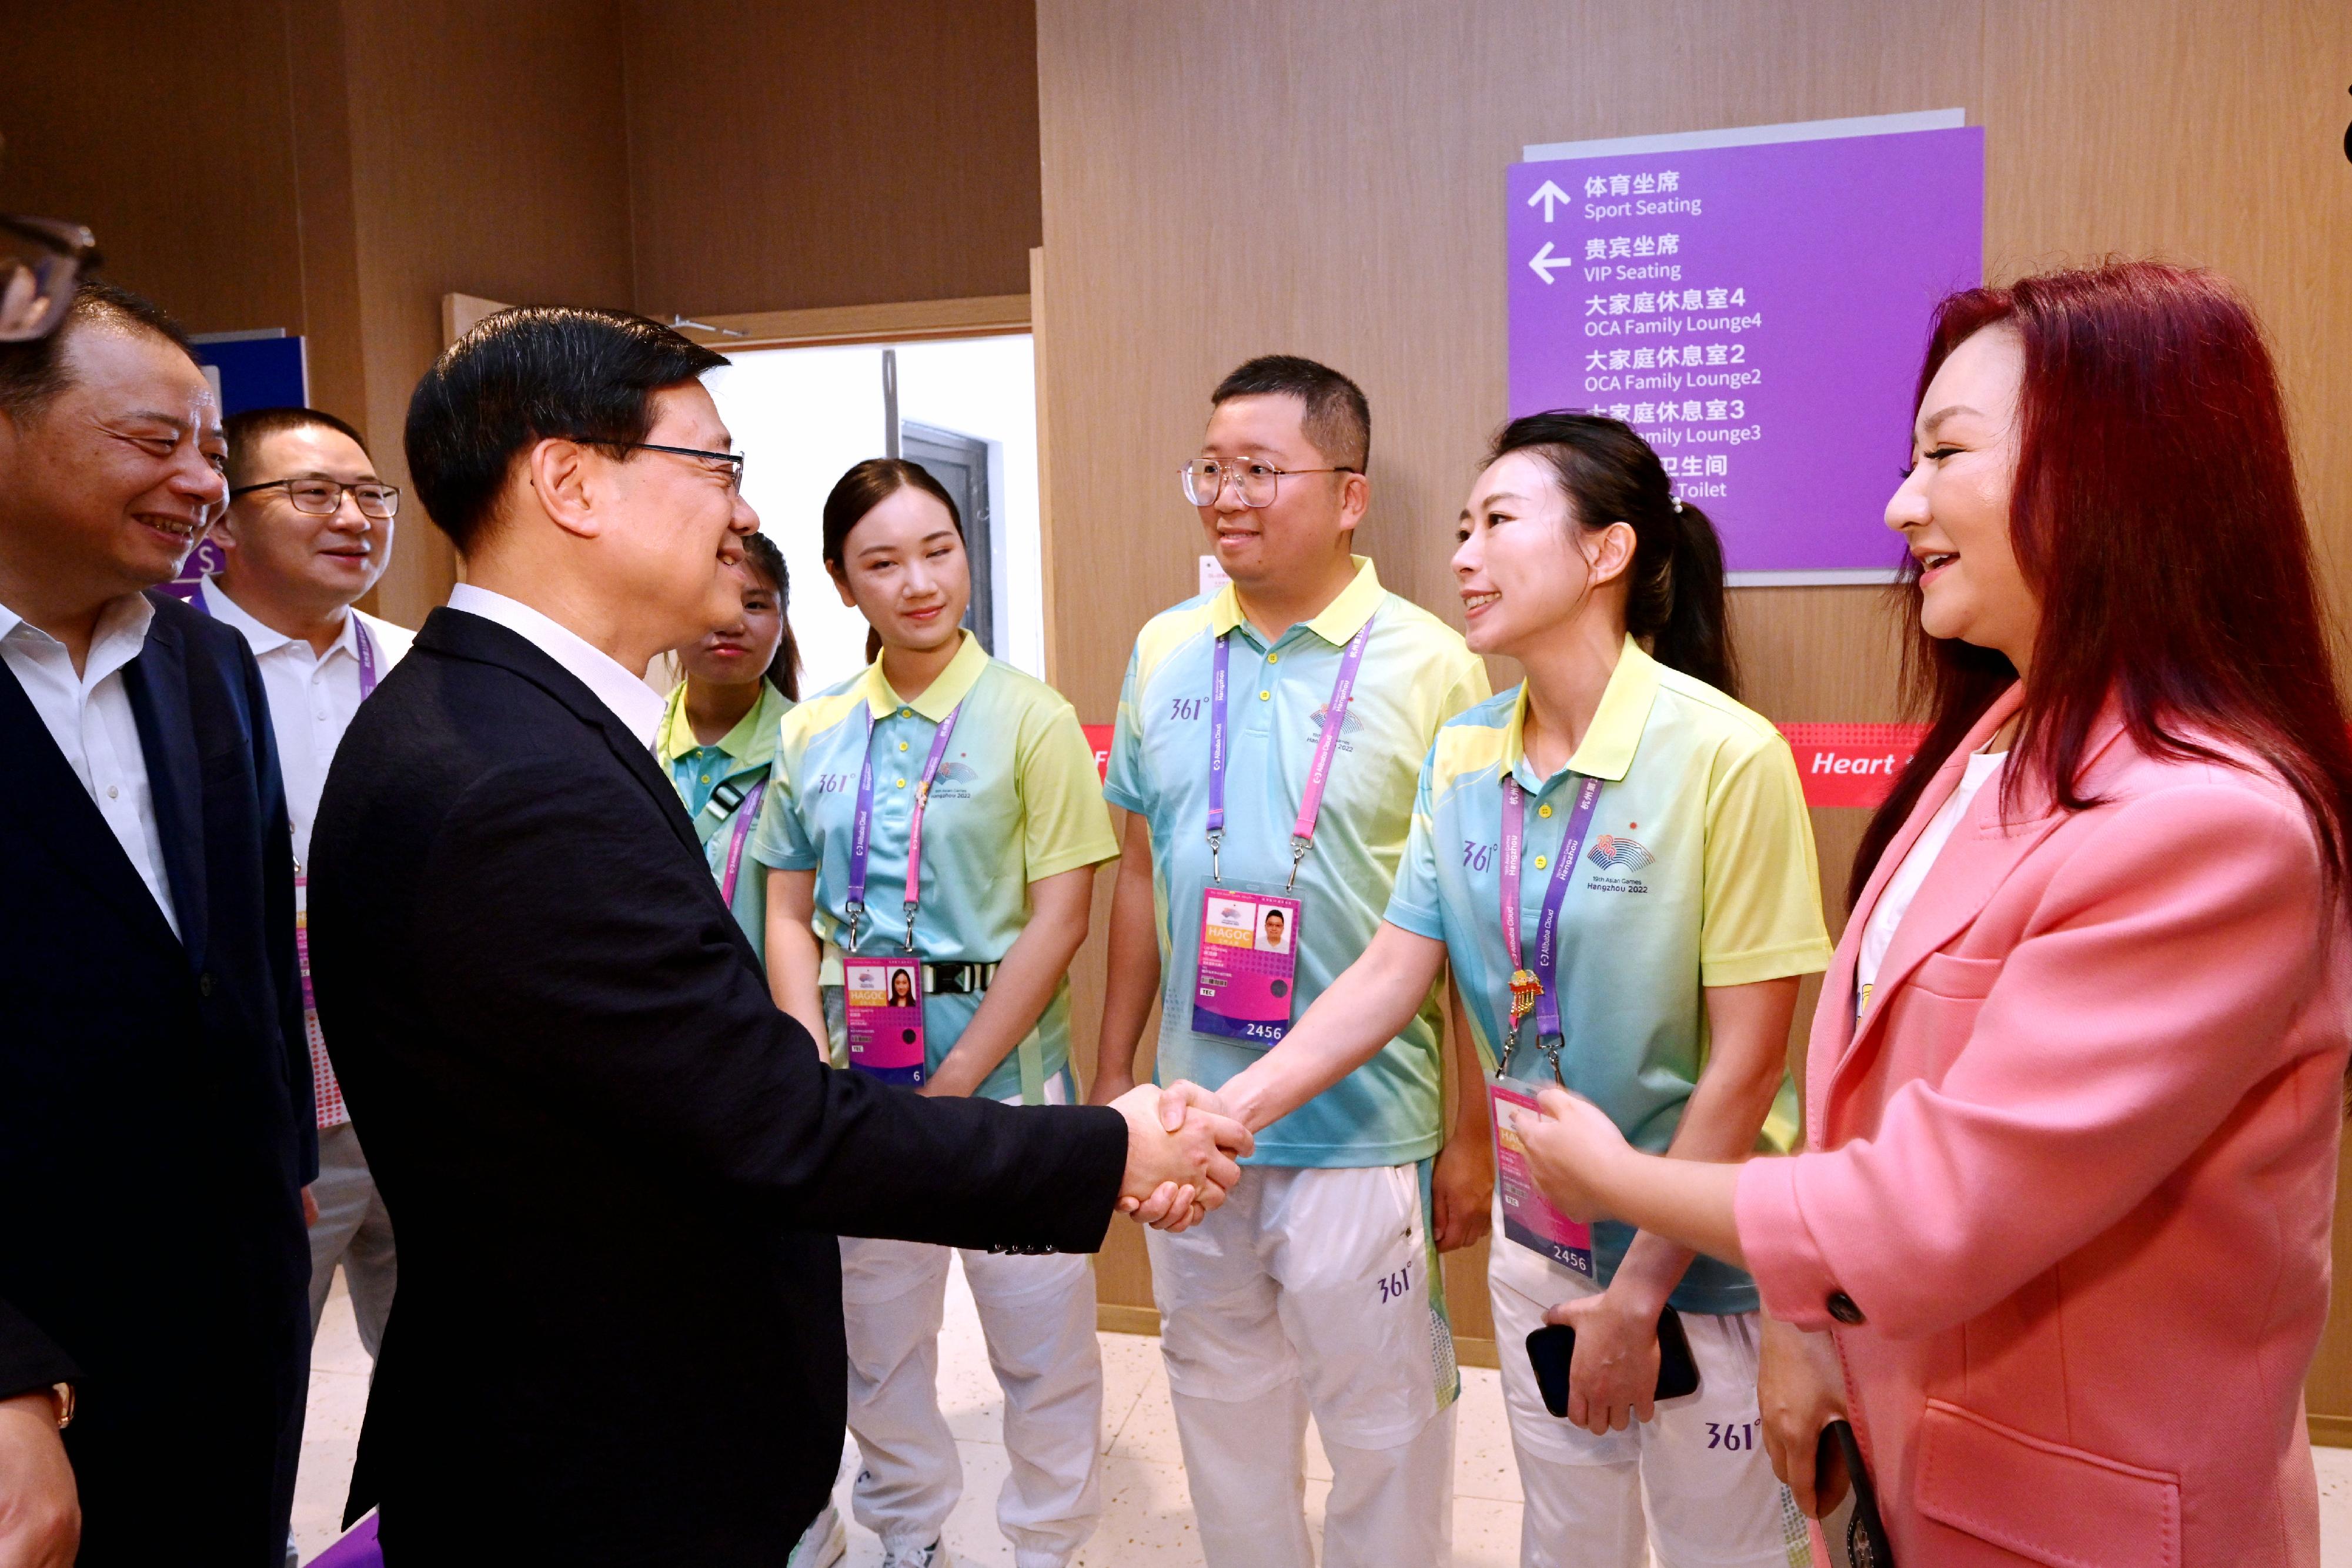 The Chief Executive, Mr John Lee, led a Hong Kong Special Administrative Region Government delegation to Hangzhou and continued his visit programme today (September 25). Photo shows Mr Lee (front row, second left) chatting with the volunteers of the 19th Asian Games Hangzhou.